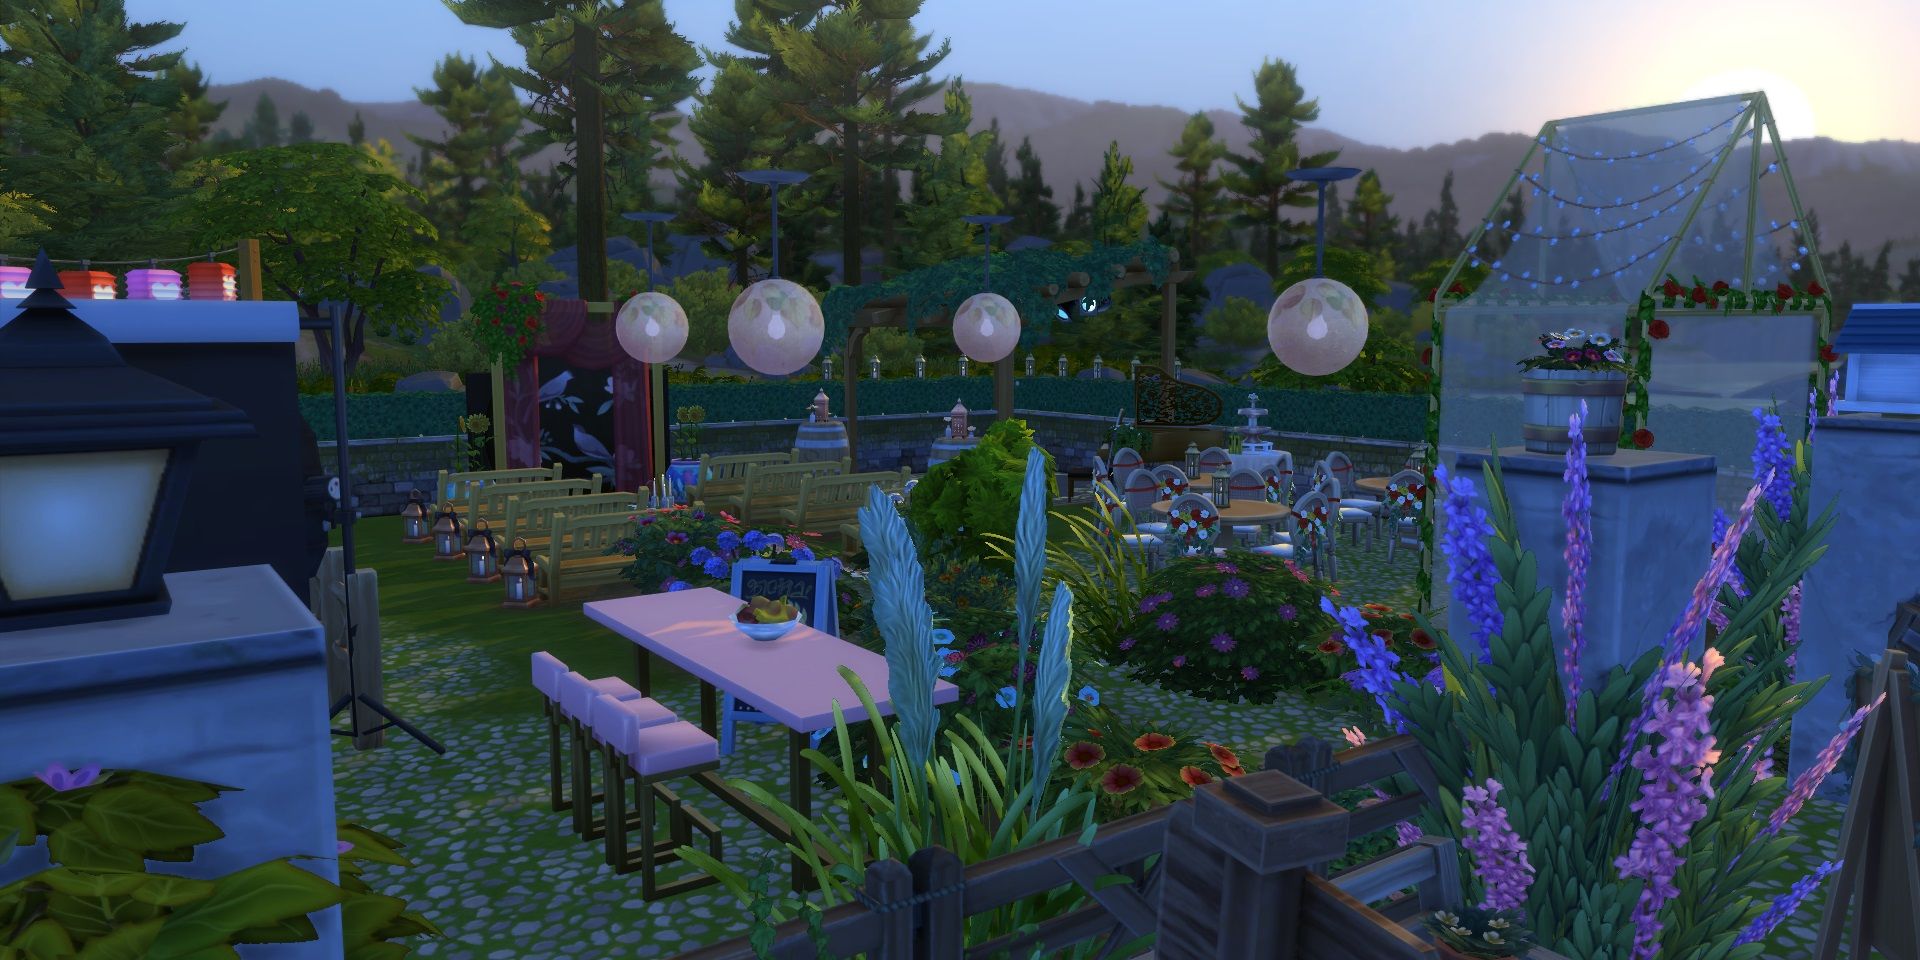 Wild Wedding venue by Aleee2011 in The Sims 4